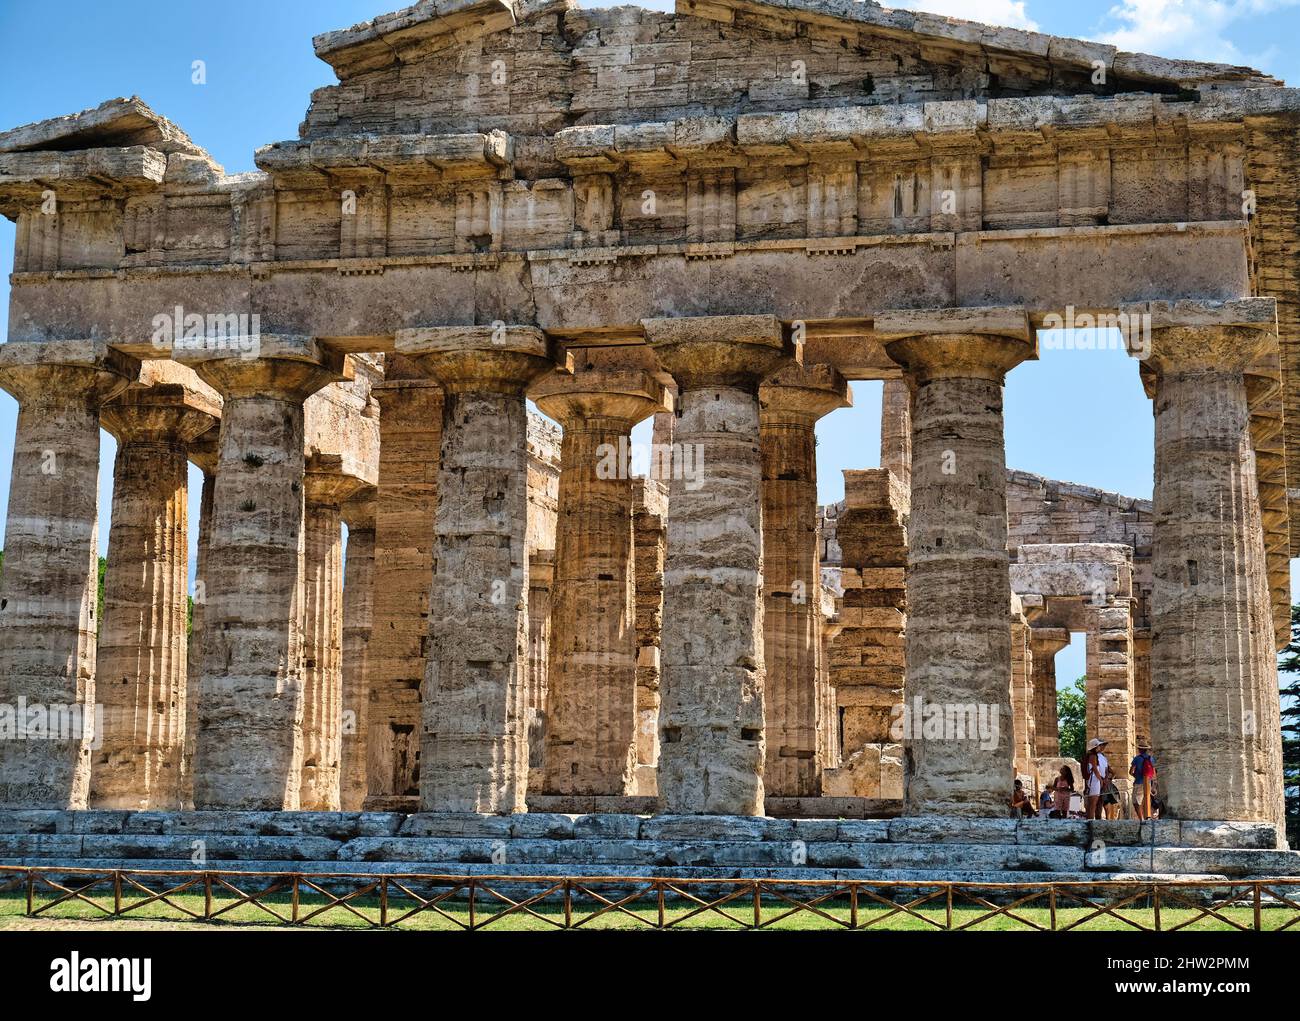 The Temple of Neptune (Temple of Poseidon) is the largest temple of the ancient polis of Paestum,  it has an extraordinarily intact architecture. Stock Photo